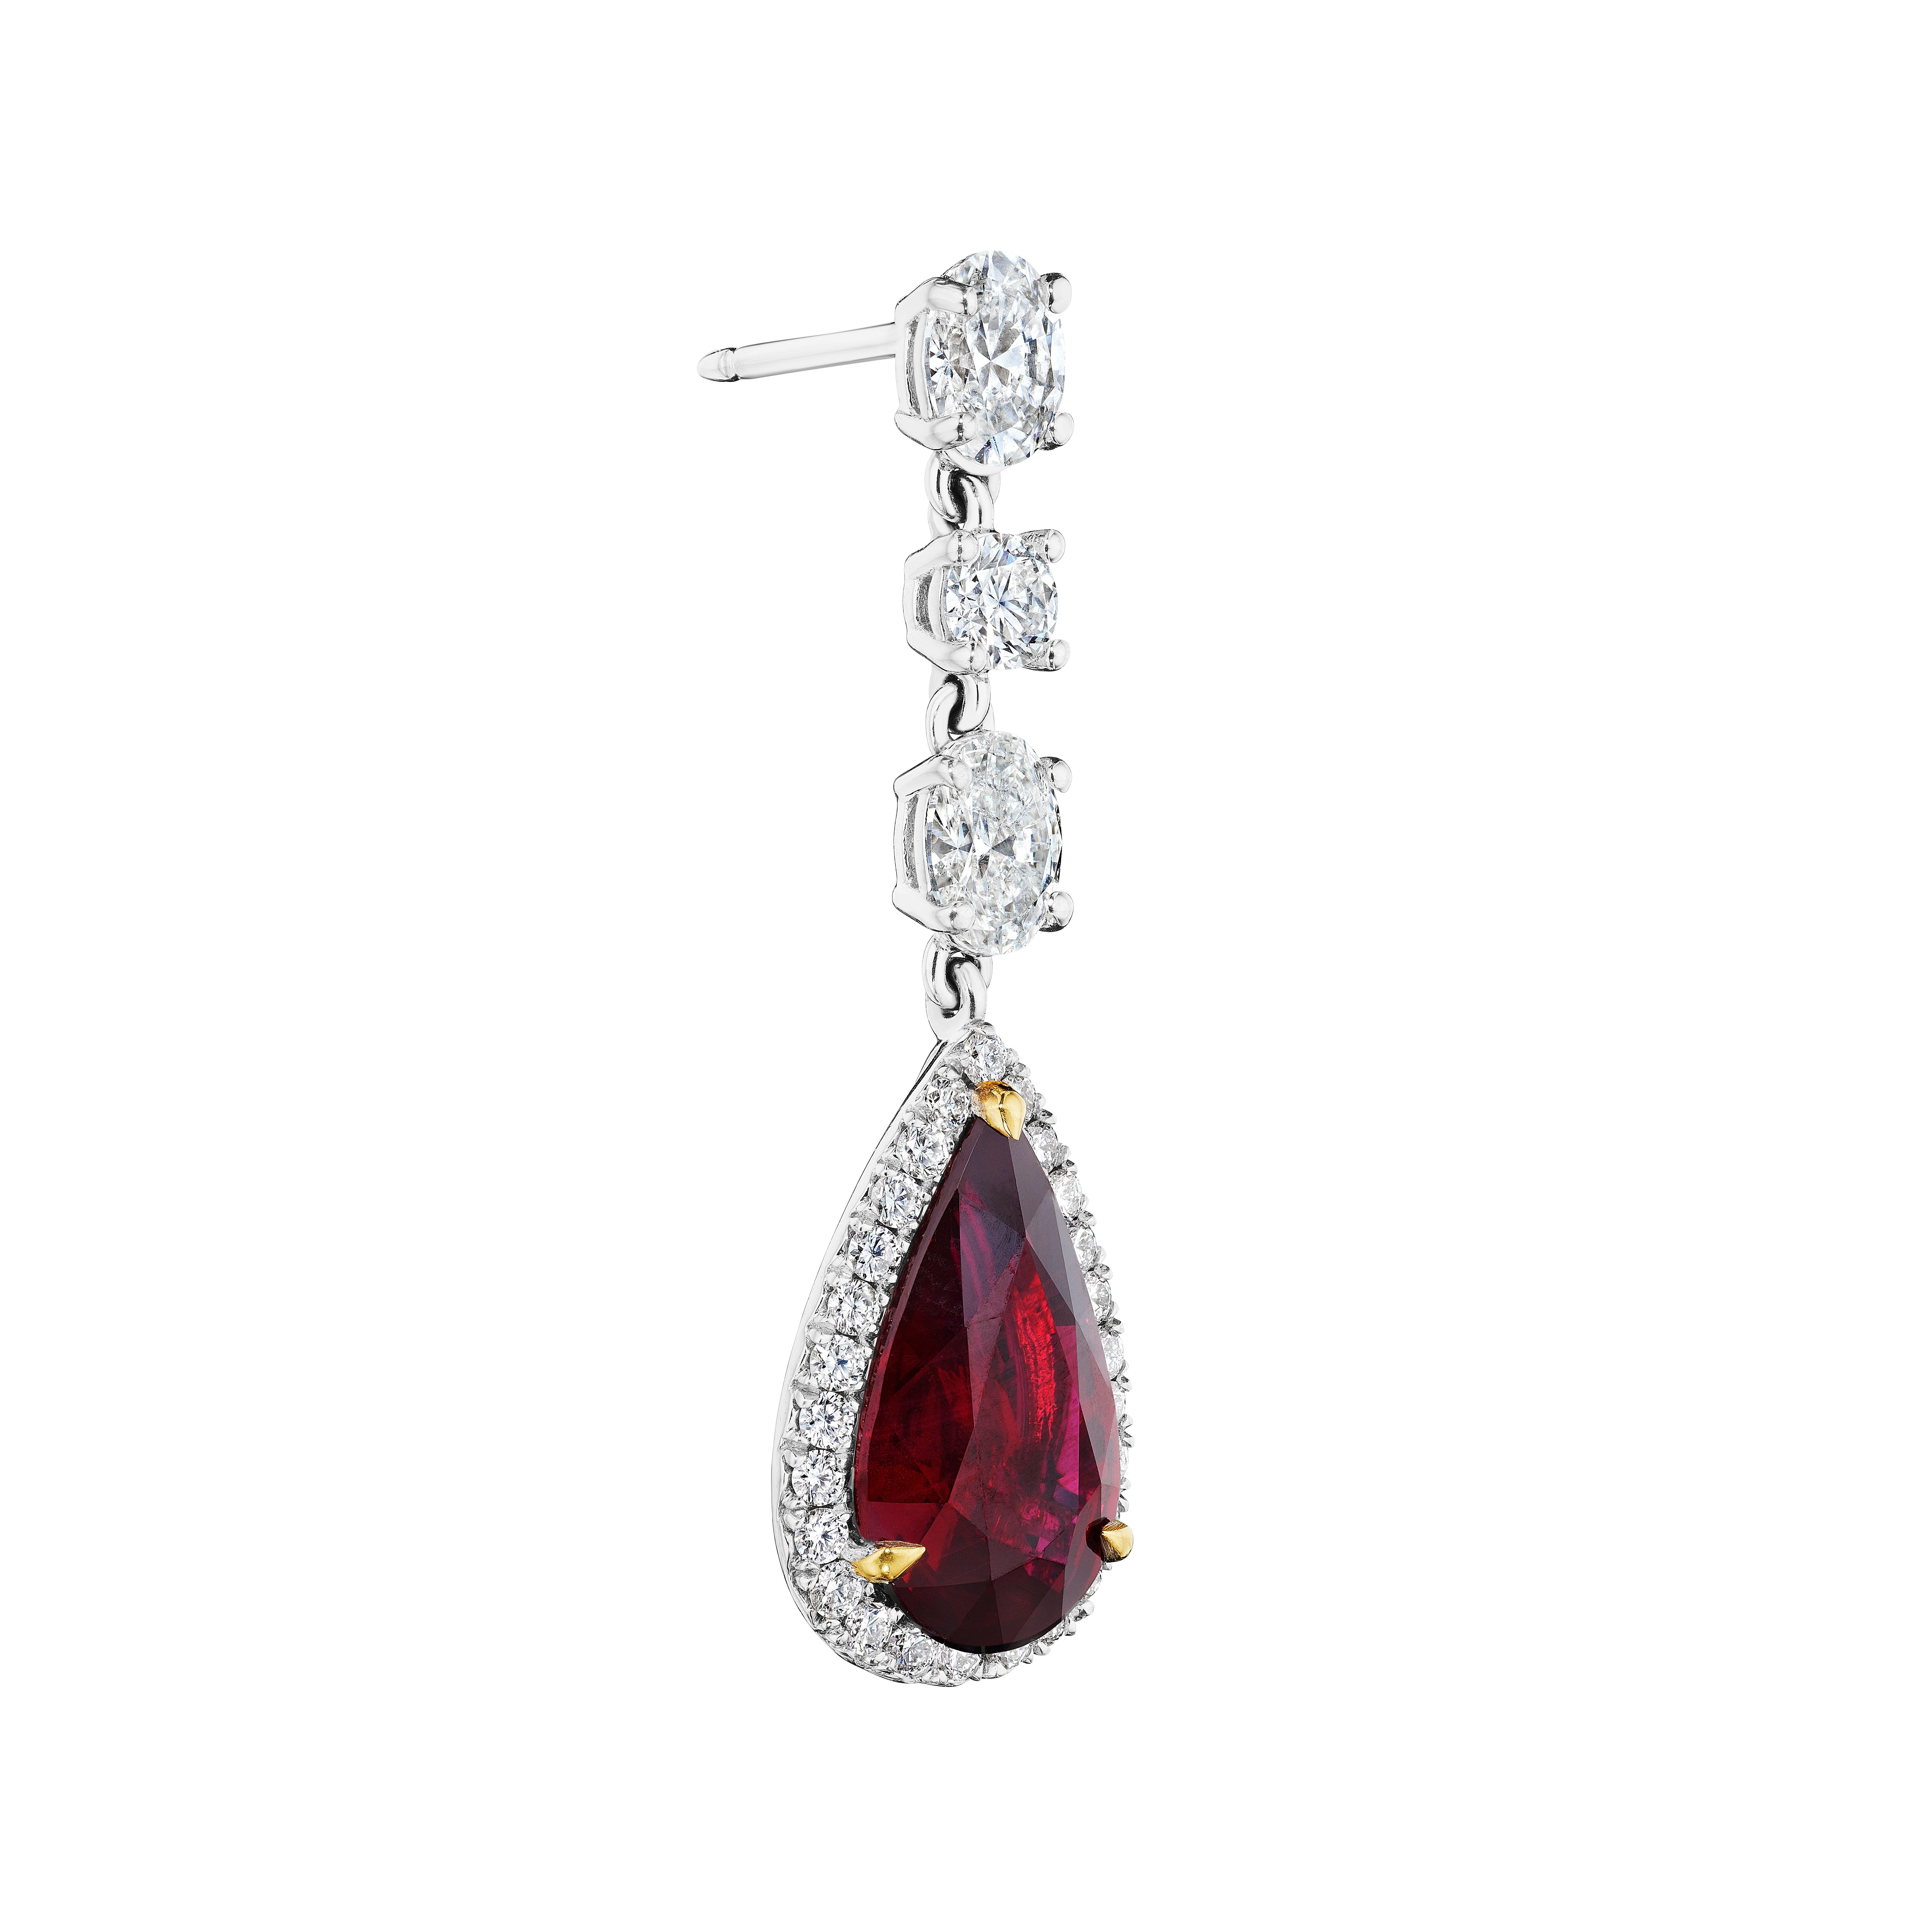 •	18KT Two Tone
•	7.44 Carats
•	Sold as a pair

•	Number of Pear Shape Rubies: 2
•	Carat Weight: 6.04ctw
•	Color: Vivid Red
•	Origin: Mozambique
•	Certificate: GRS 2017-092046 & GRS 2017-092047
•	No indications of Heating

•	Number of Oval Diamonds: